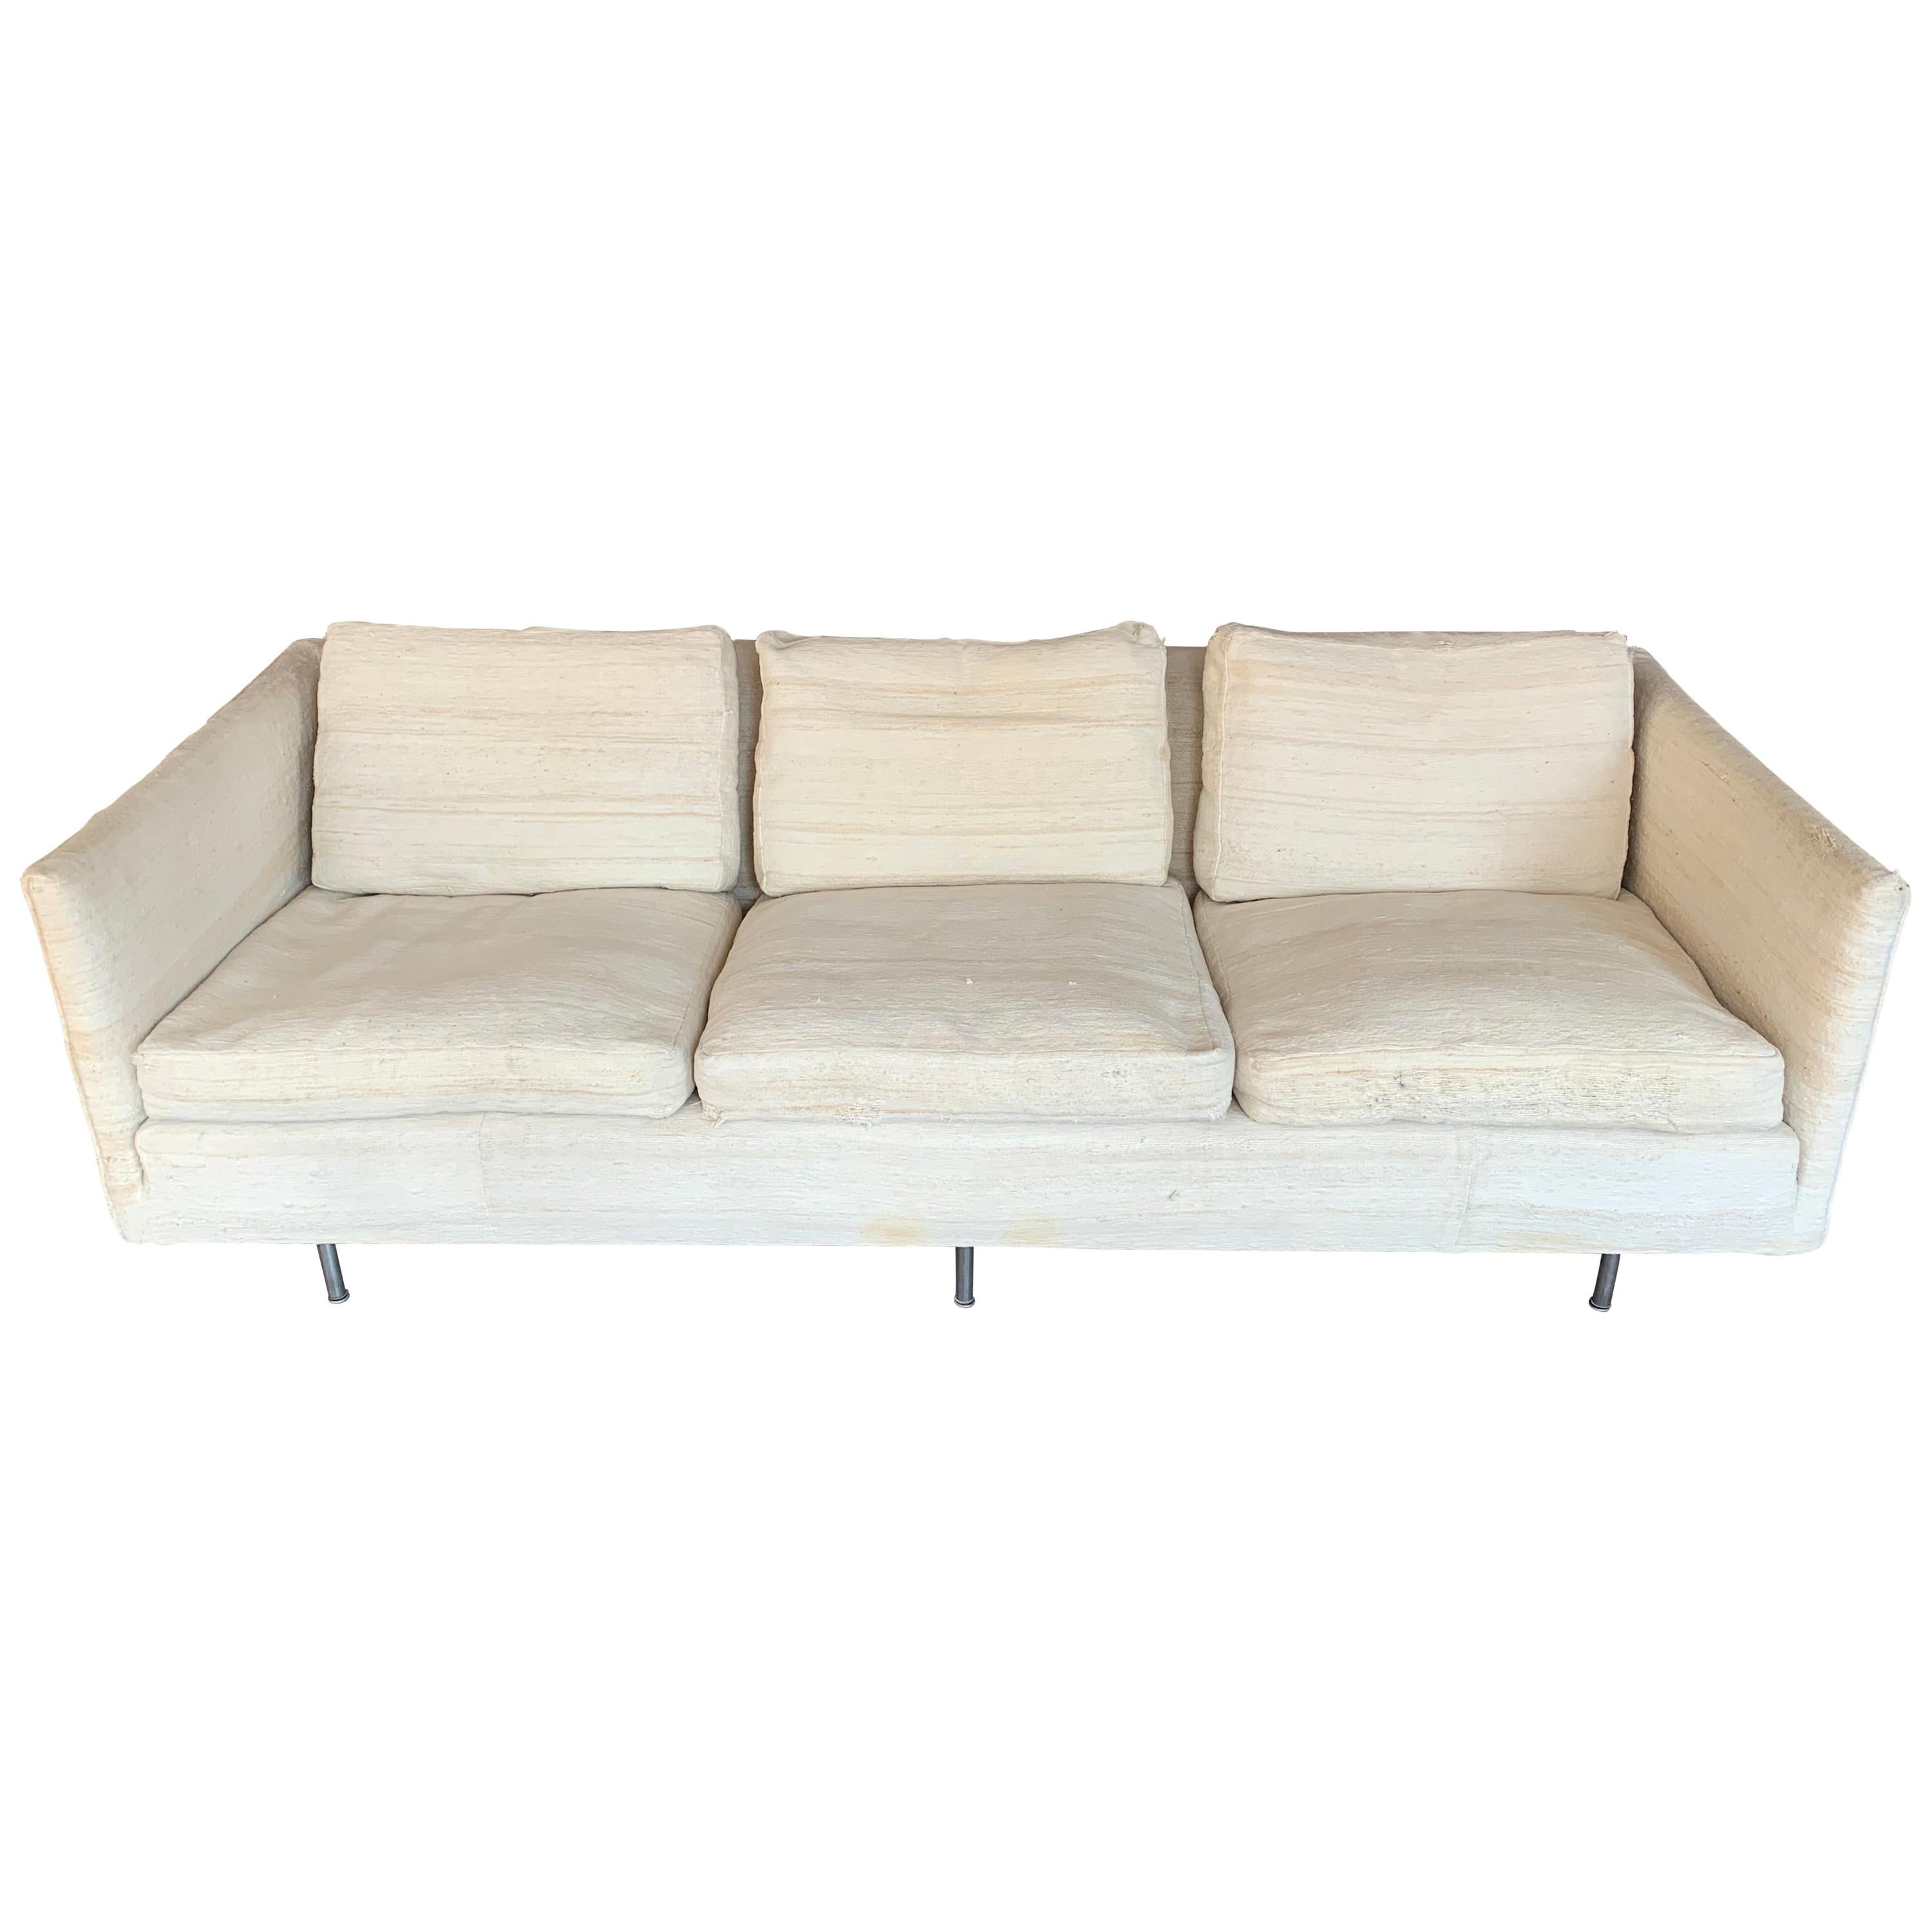 Ben Thompson for Design Research Mid-Century Modern Sofa at 1stDibs ...